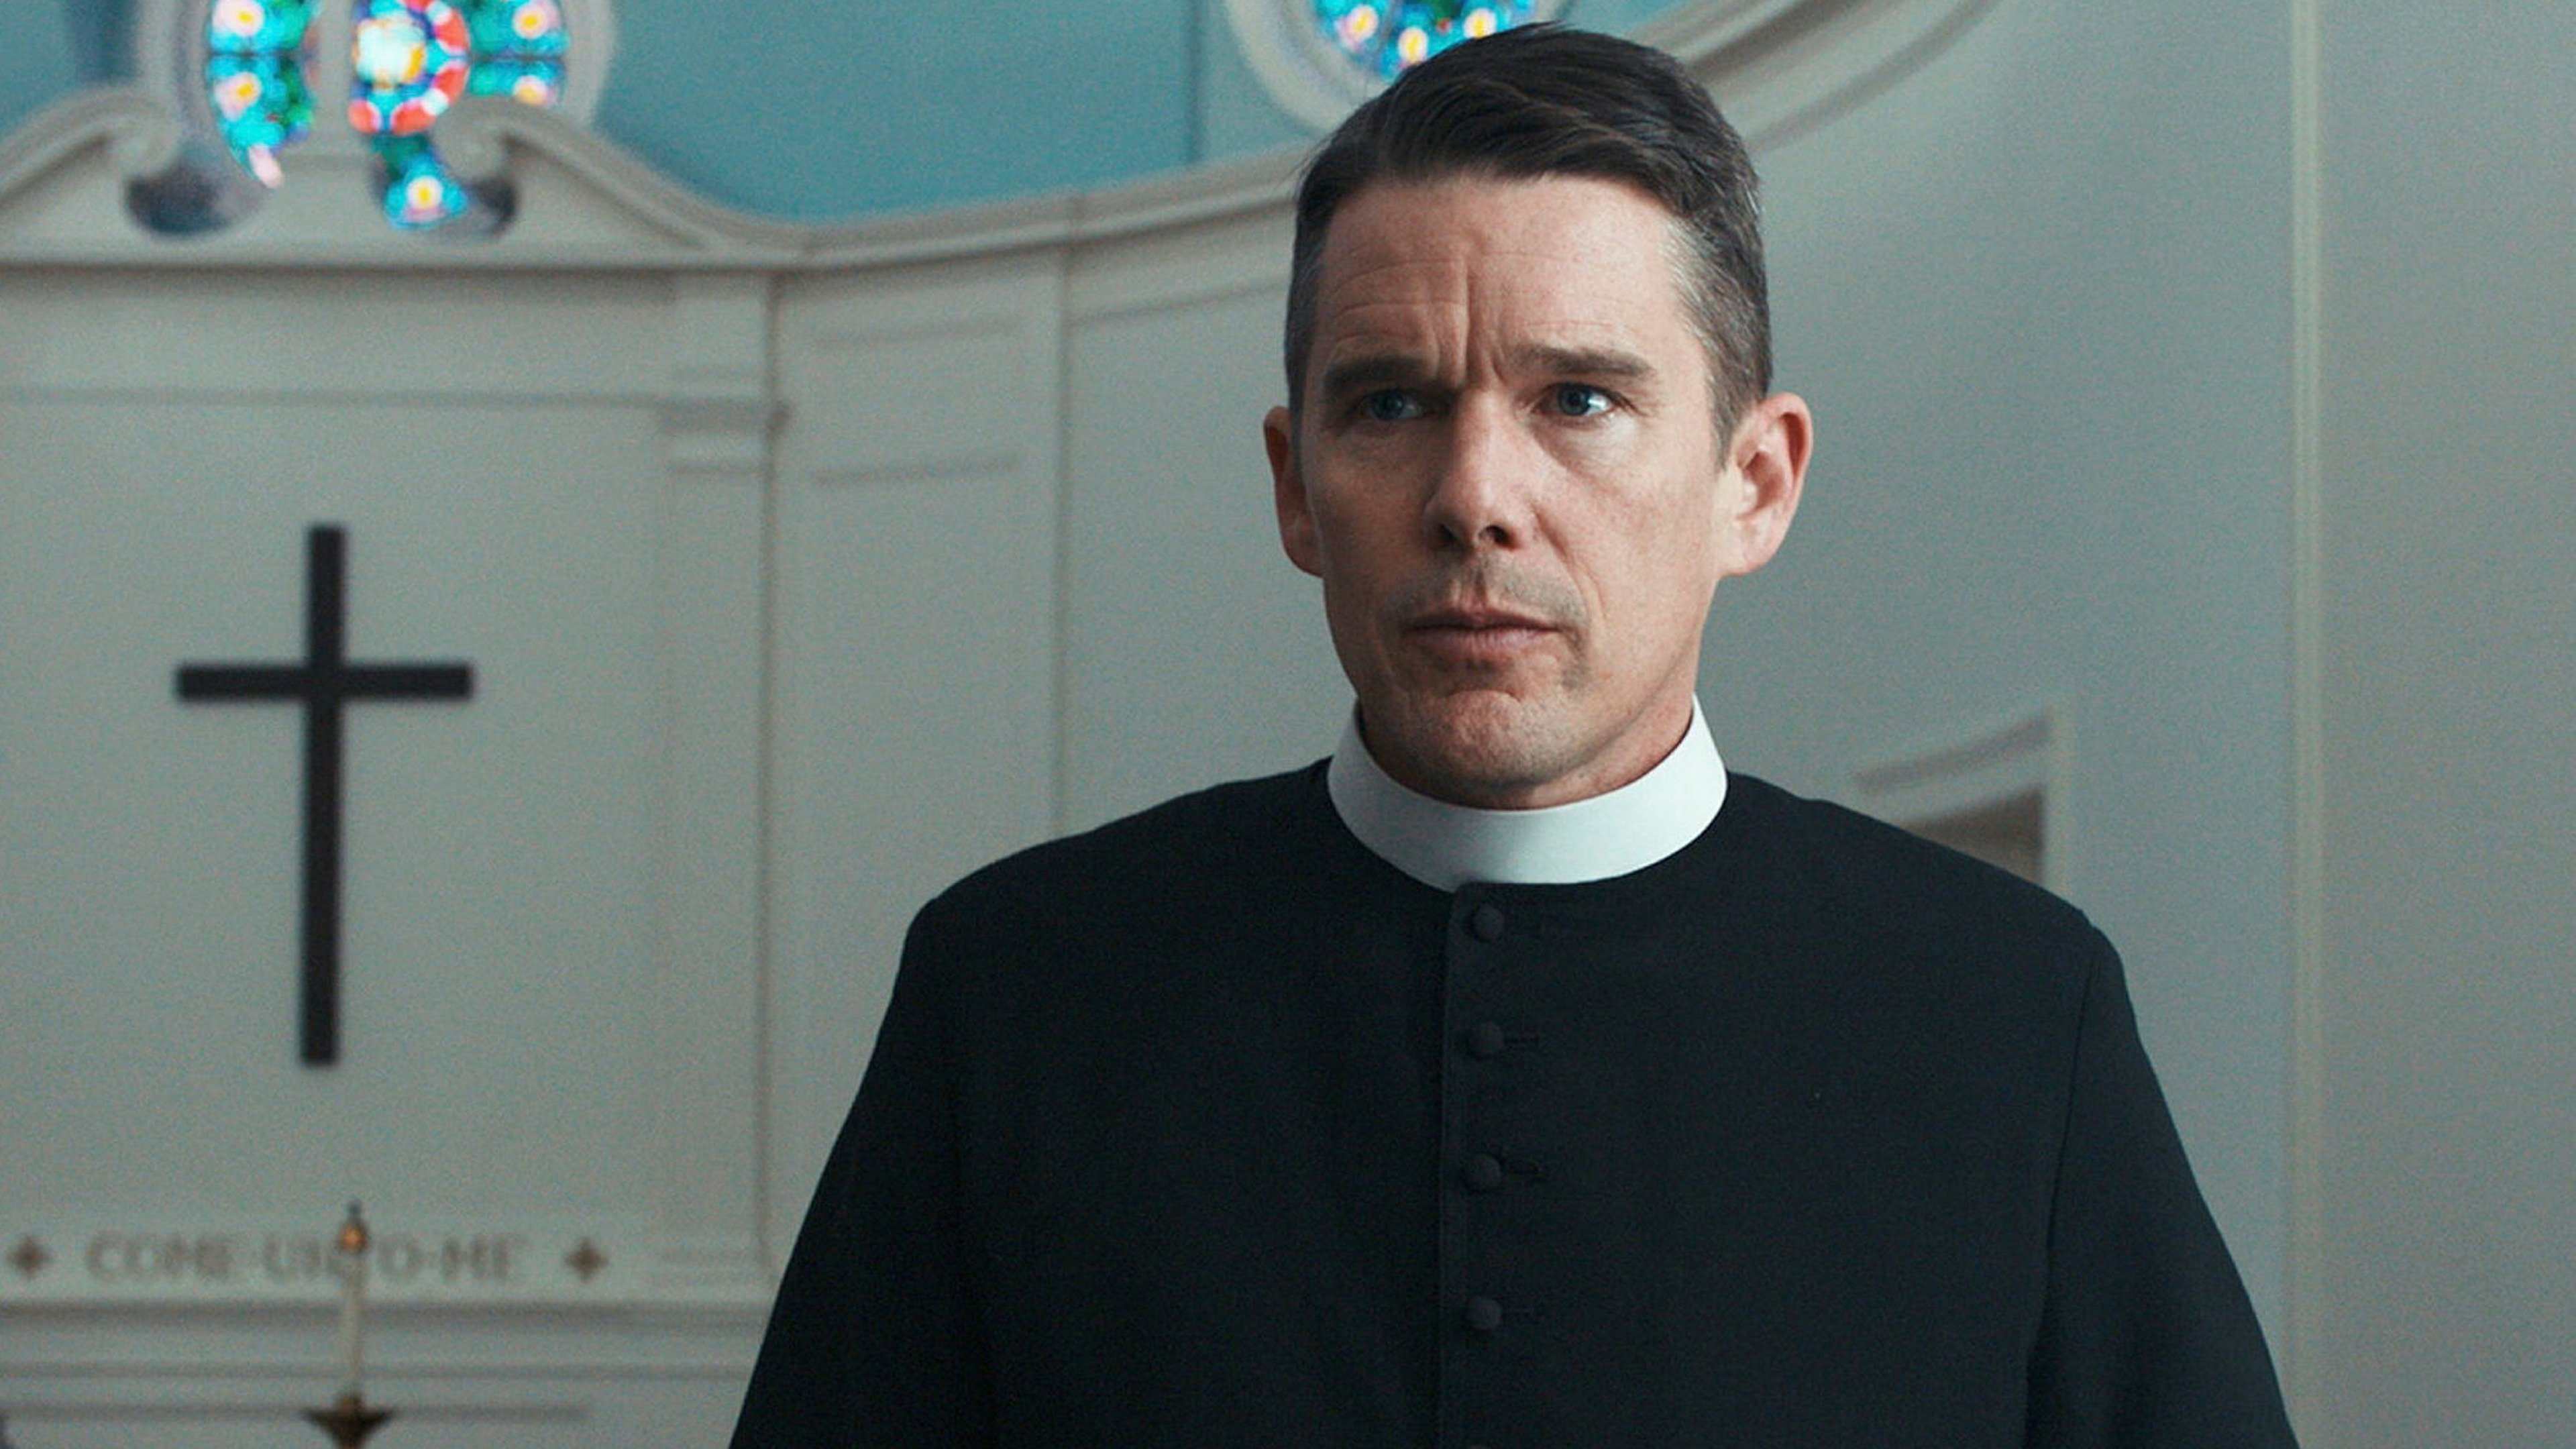 first-reformed-trailer-1-trailers-videos-rotten-tomatoes